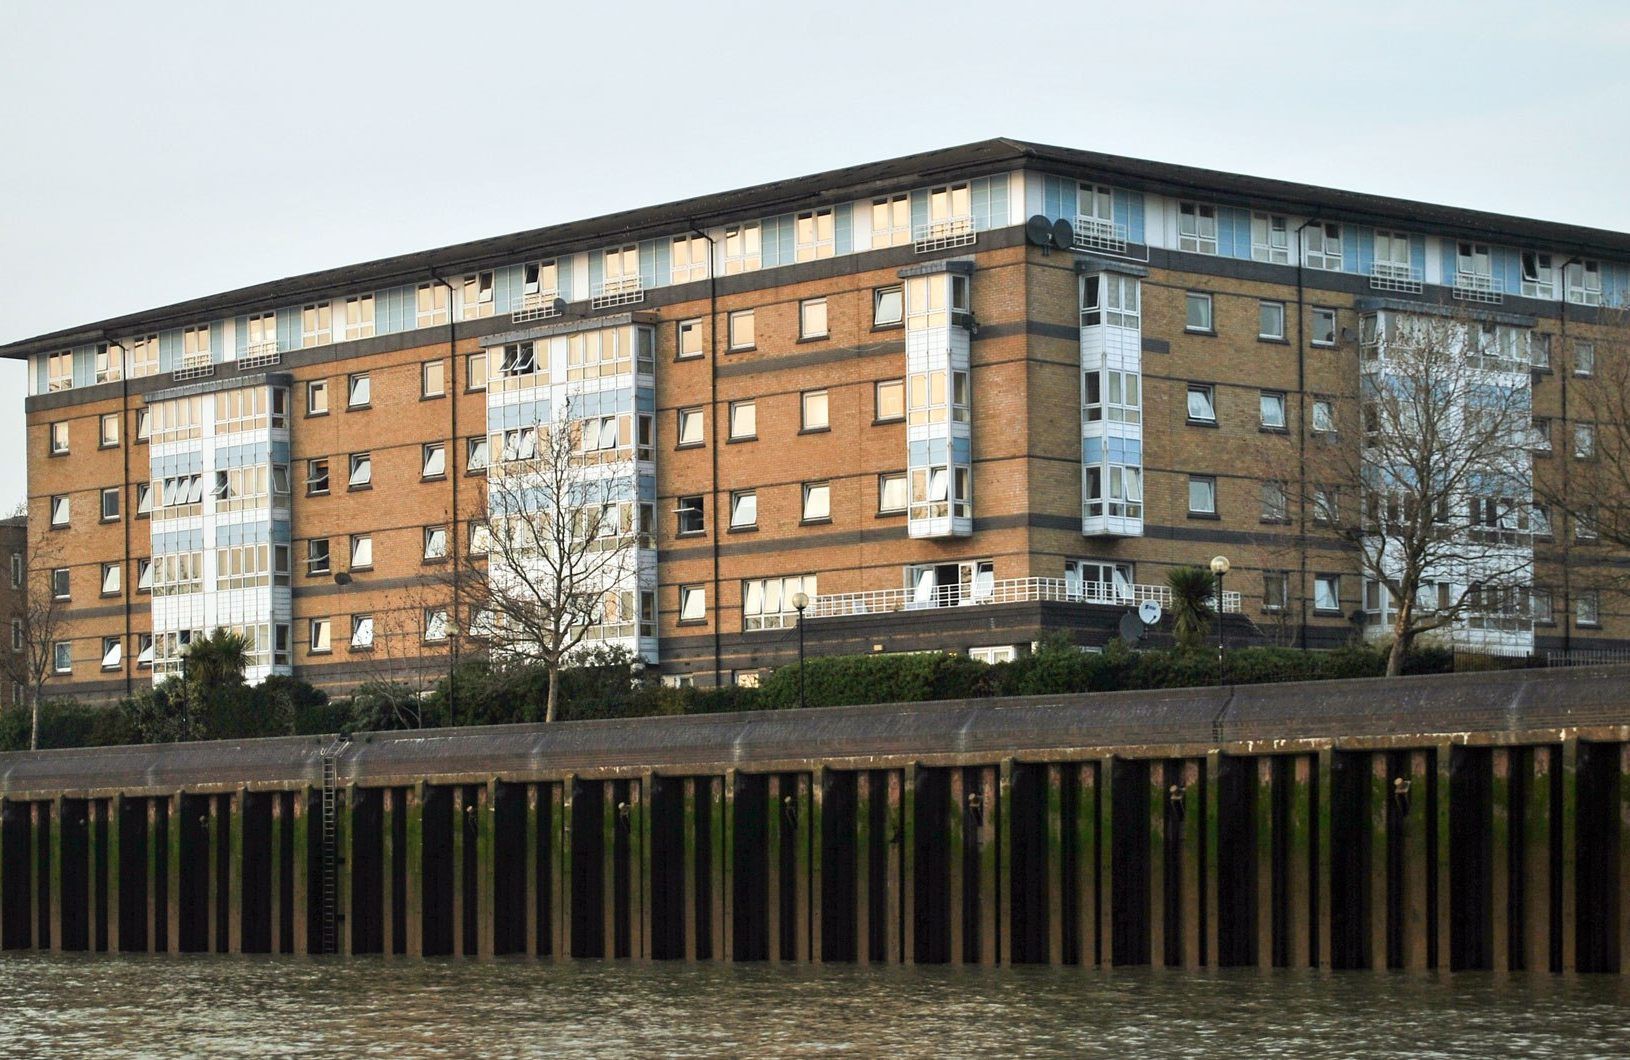 The Labour candidate was given a 330,000 riverside property